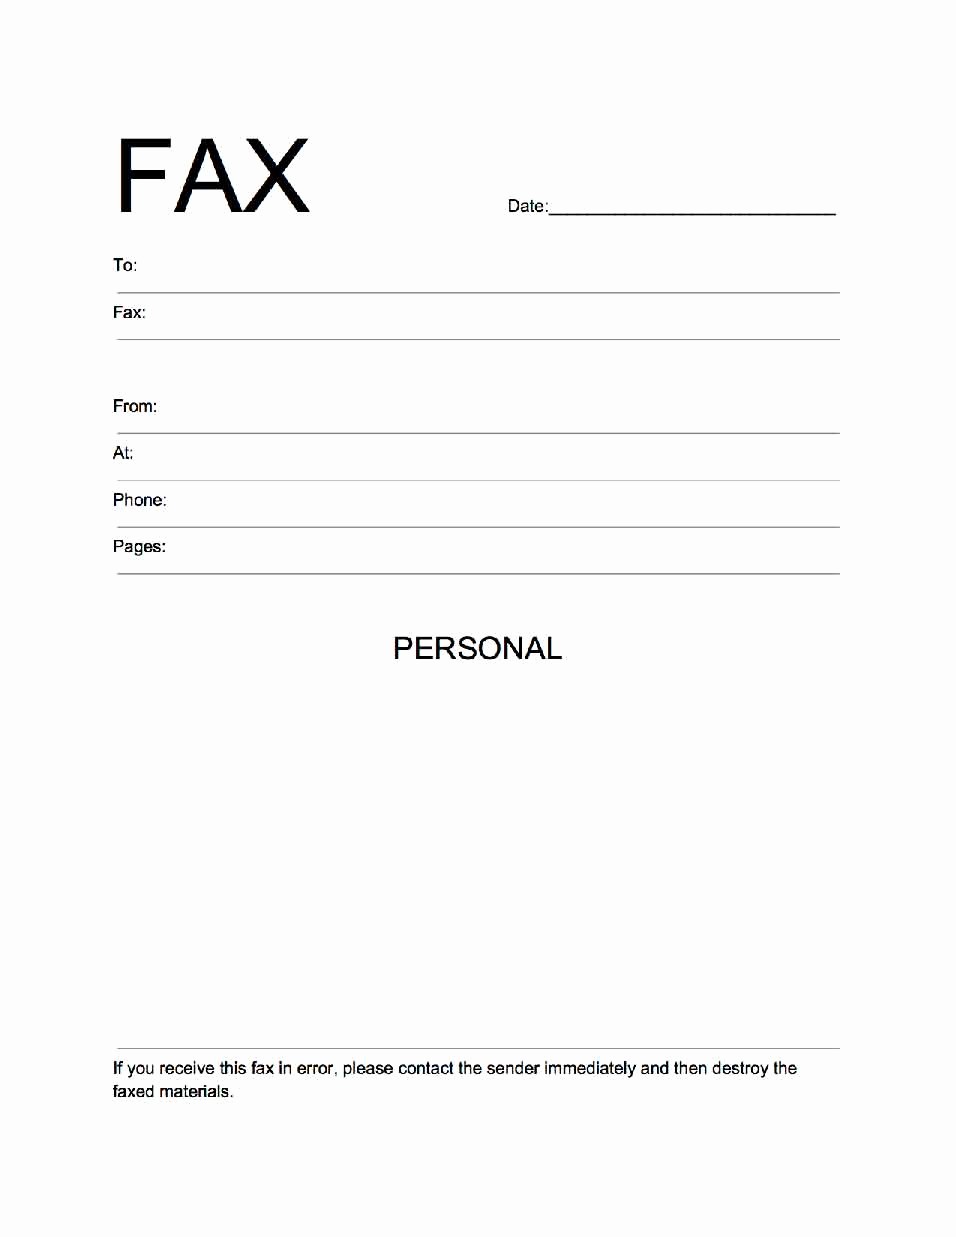 Sample Of Fax Cover Letter Fresh Free Fax Cover Sheet Template Download